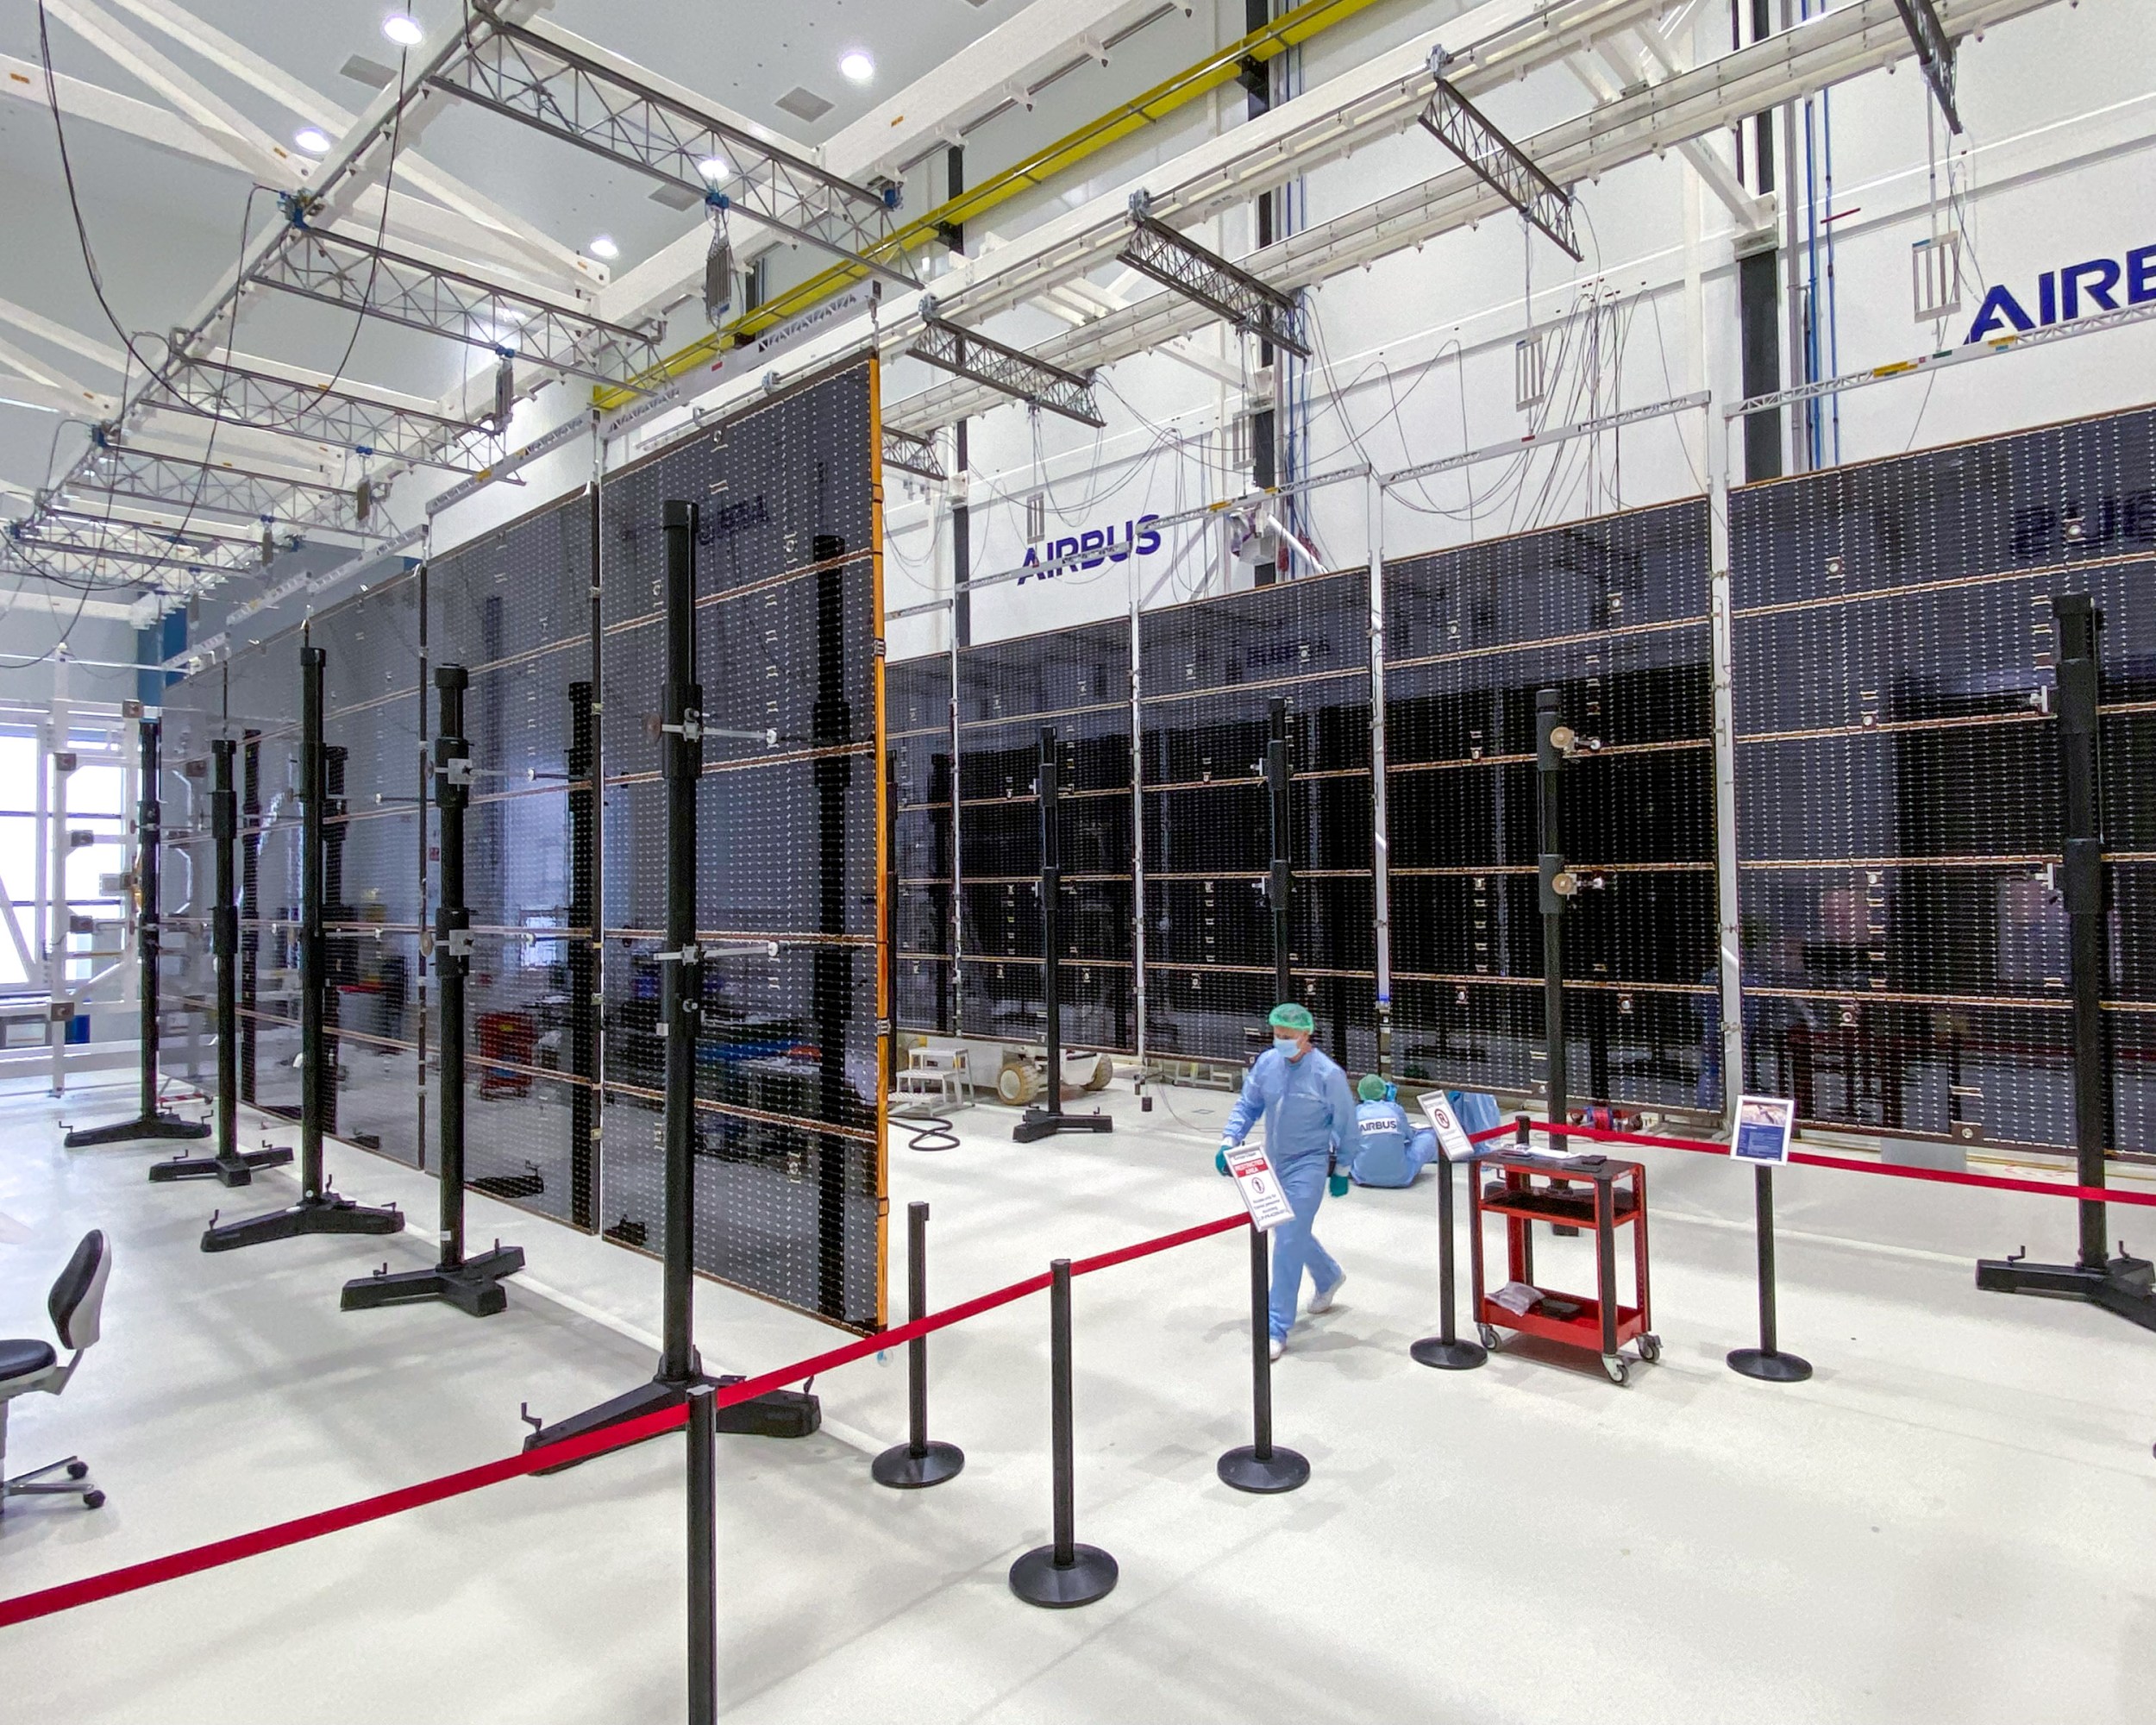 solar array “wings” for NASA’s Europa Clipper in the cleanroom of Airbus in Leiden